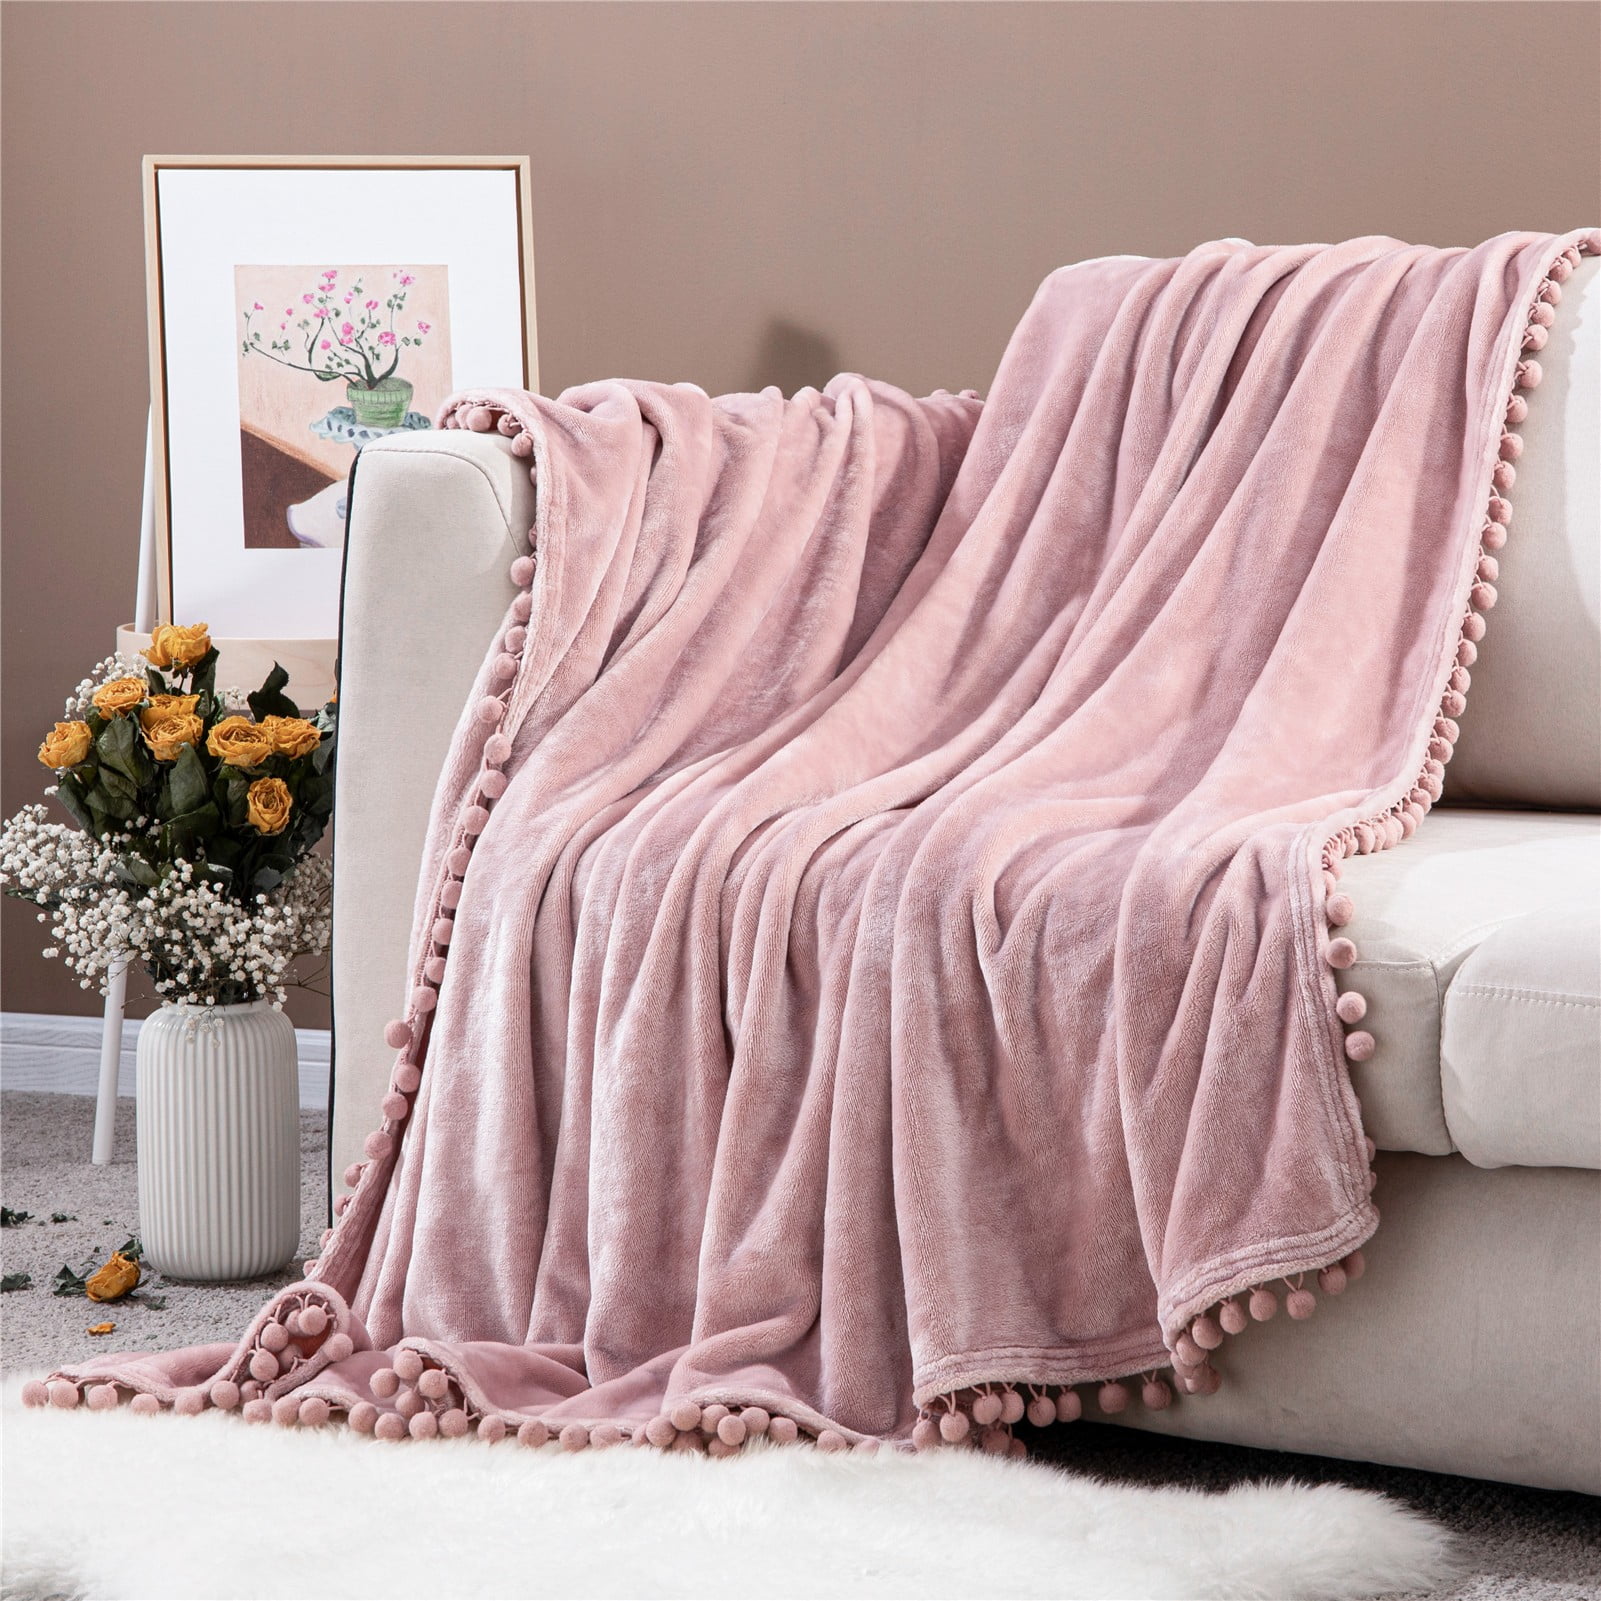 Rosy Pink Cherry,Soft Flannel Blanket Warm and Comfortable Throw Blanket for Bed/Couch/Sofa/Office/Camping